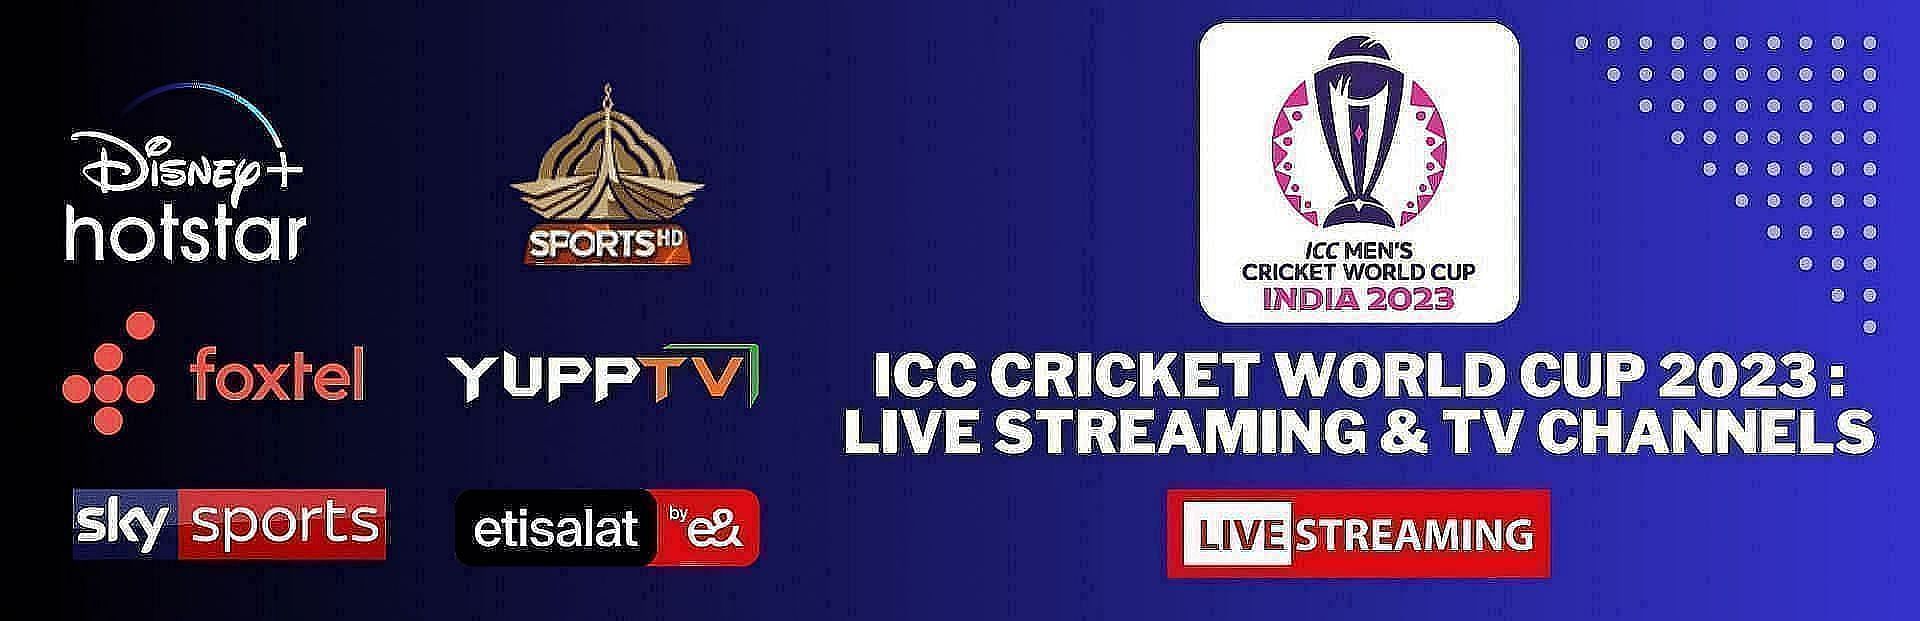 cricket tv channel